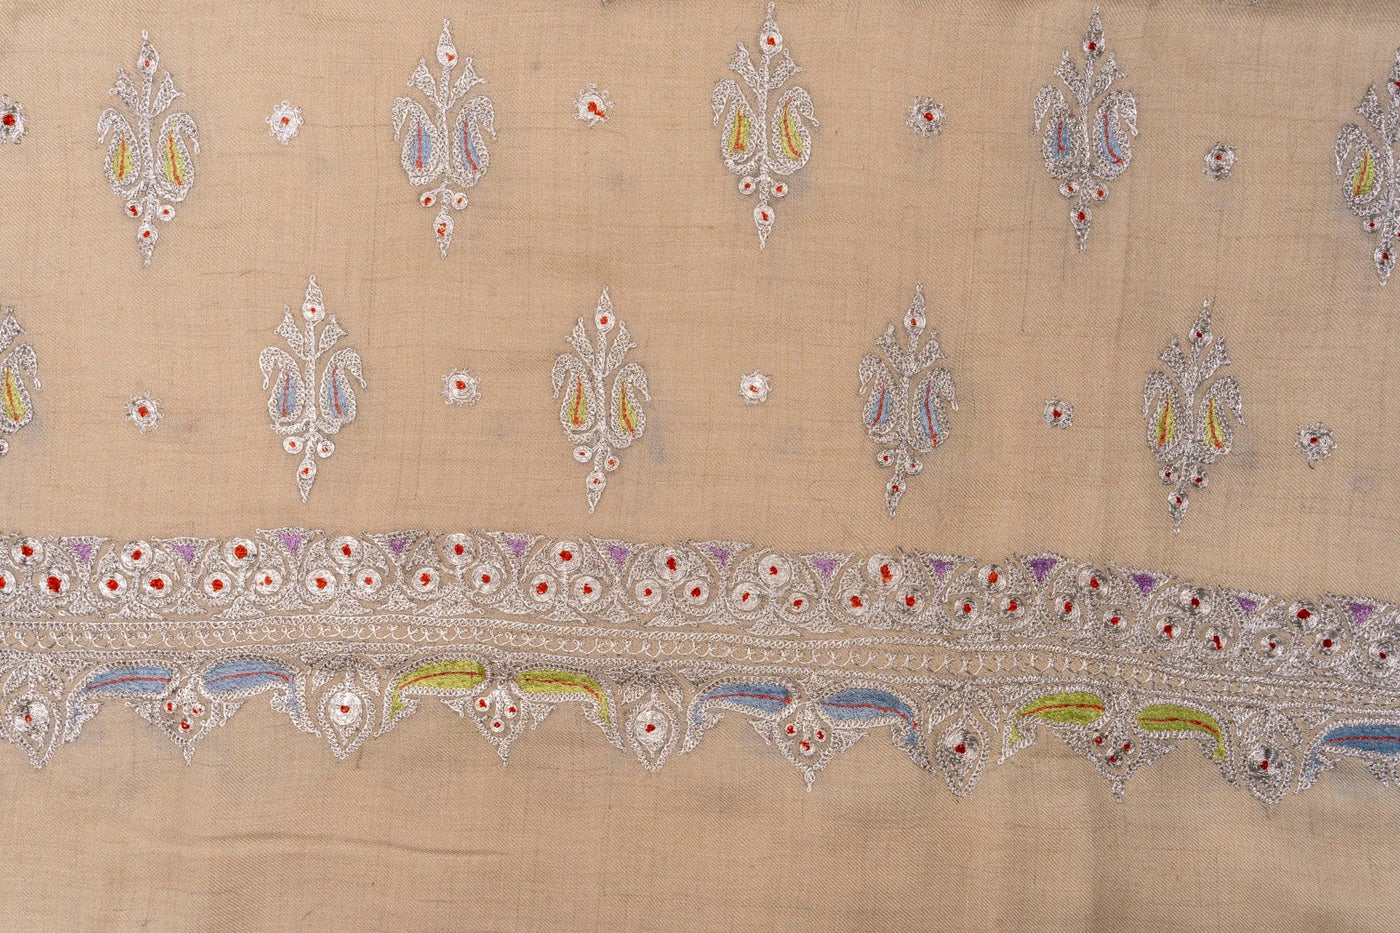 Beige Blossom Tilla Enchantment - Hand Embroidered Pashmina Shawl with Tilla and Sozni Embroidery